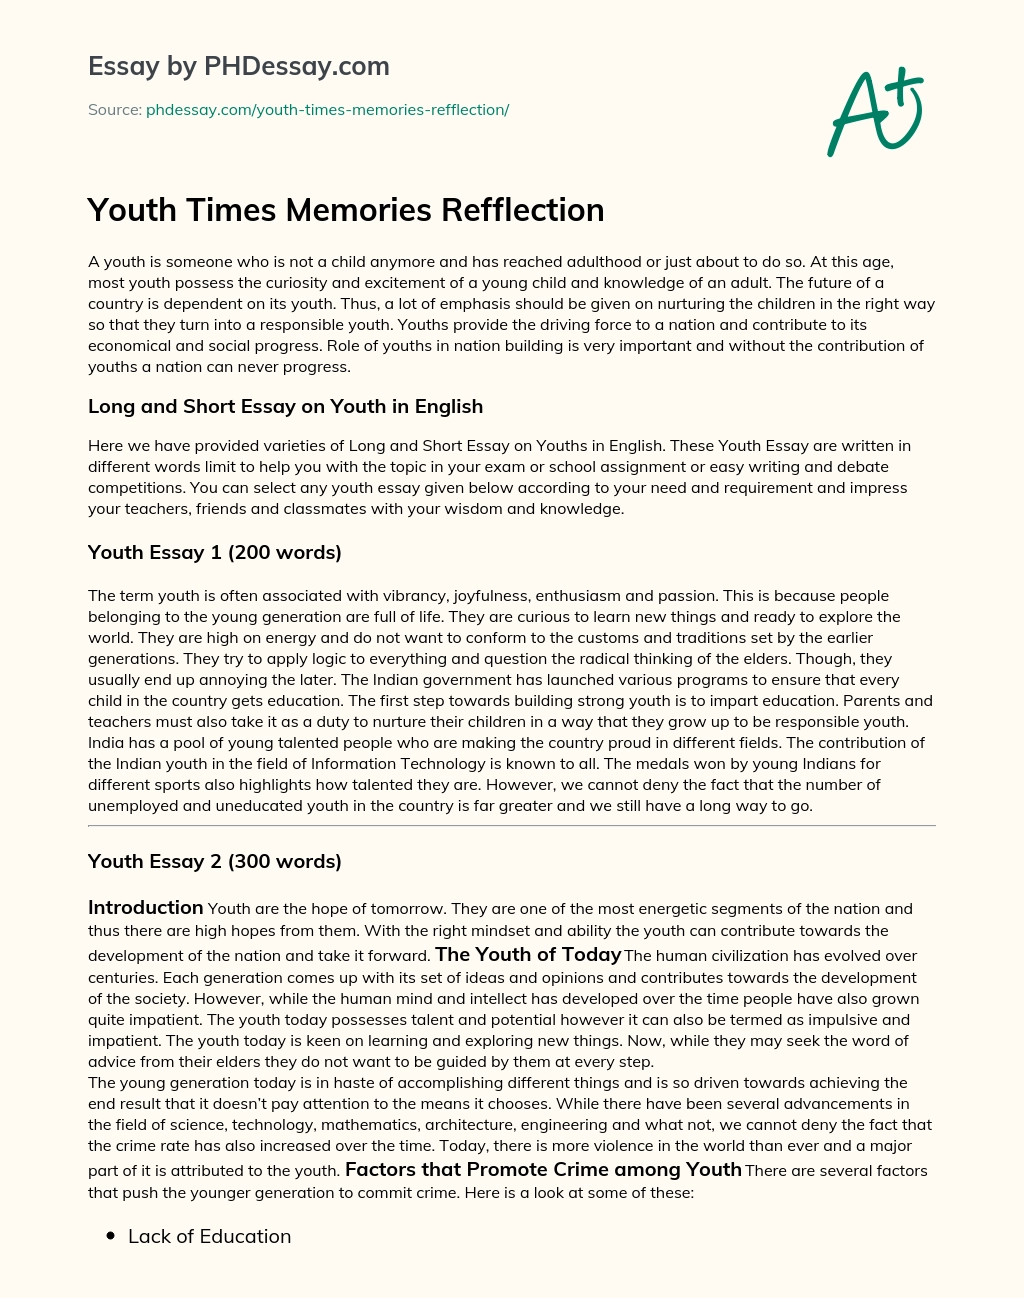 Youth Times Memories Refflection essay